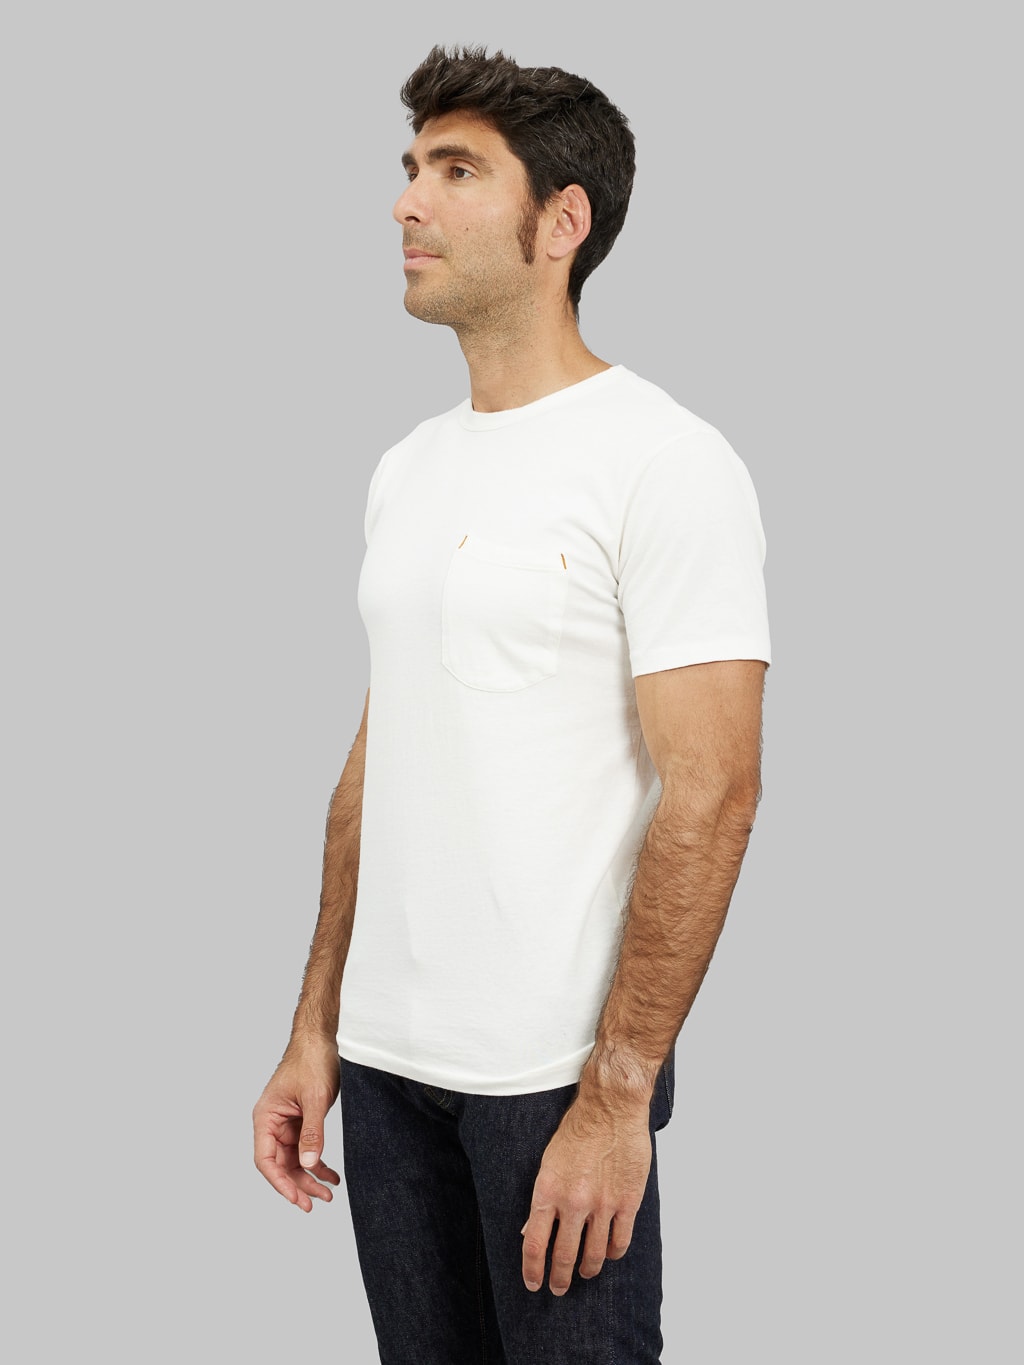 freenote cloth 9 ounce pocket t shirt white side look